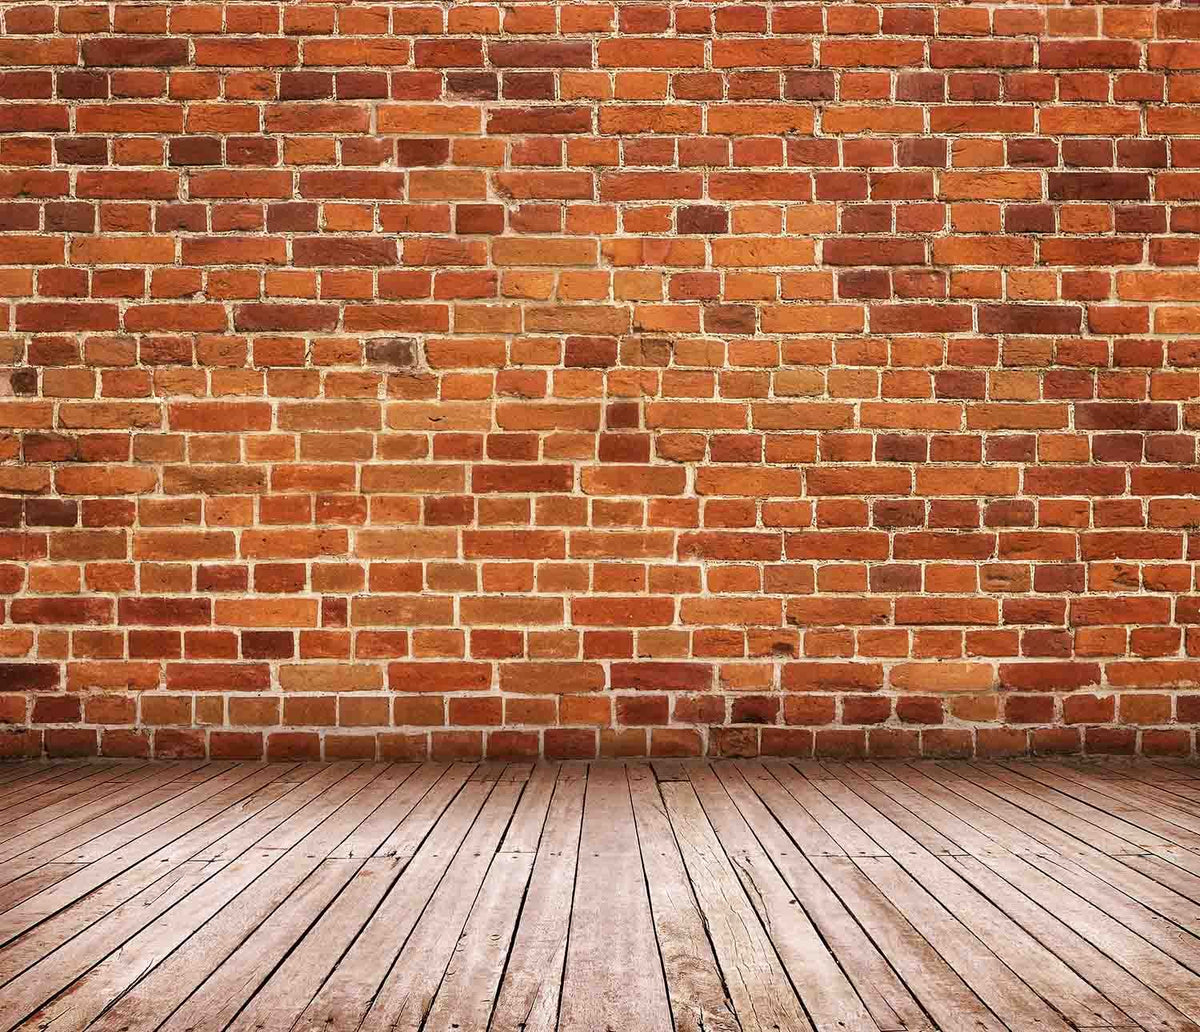 Mottled Red Brick City Wall With Wood Floor Photography Backdrop Shopbackdrop